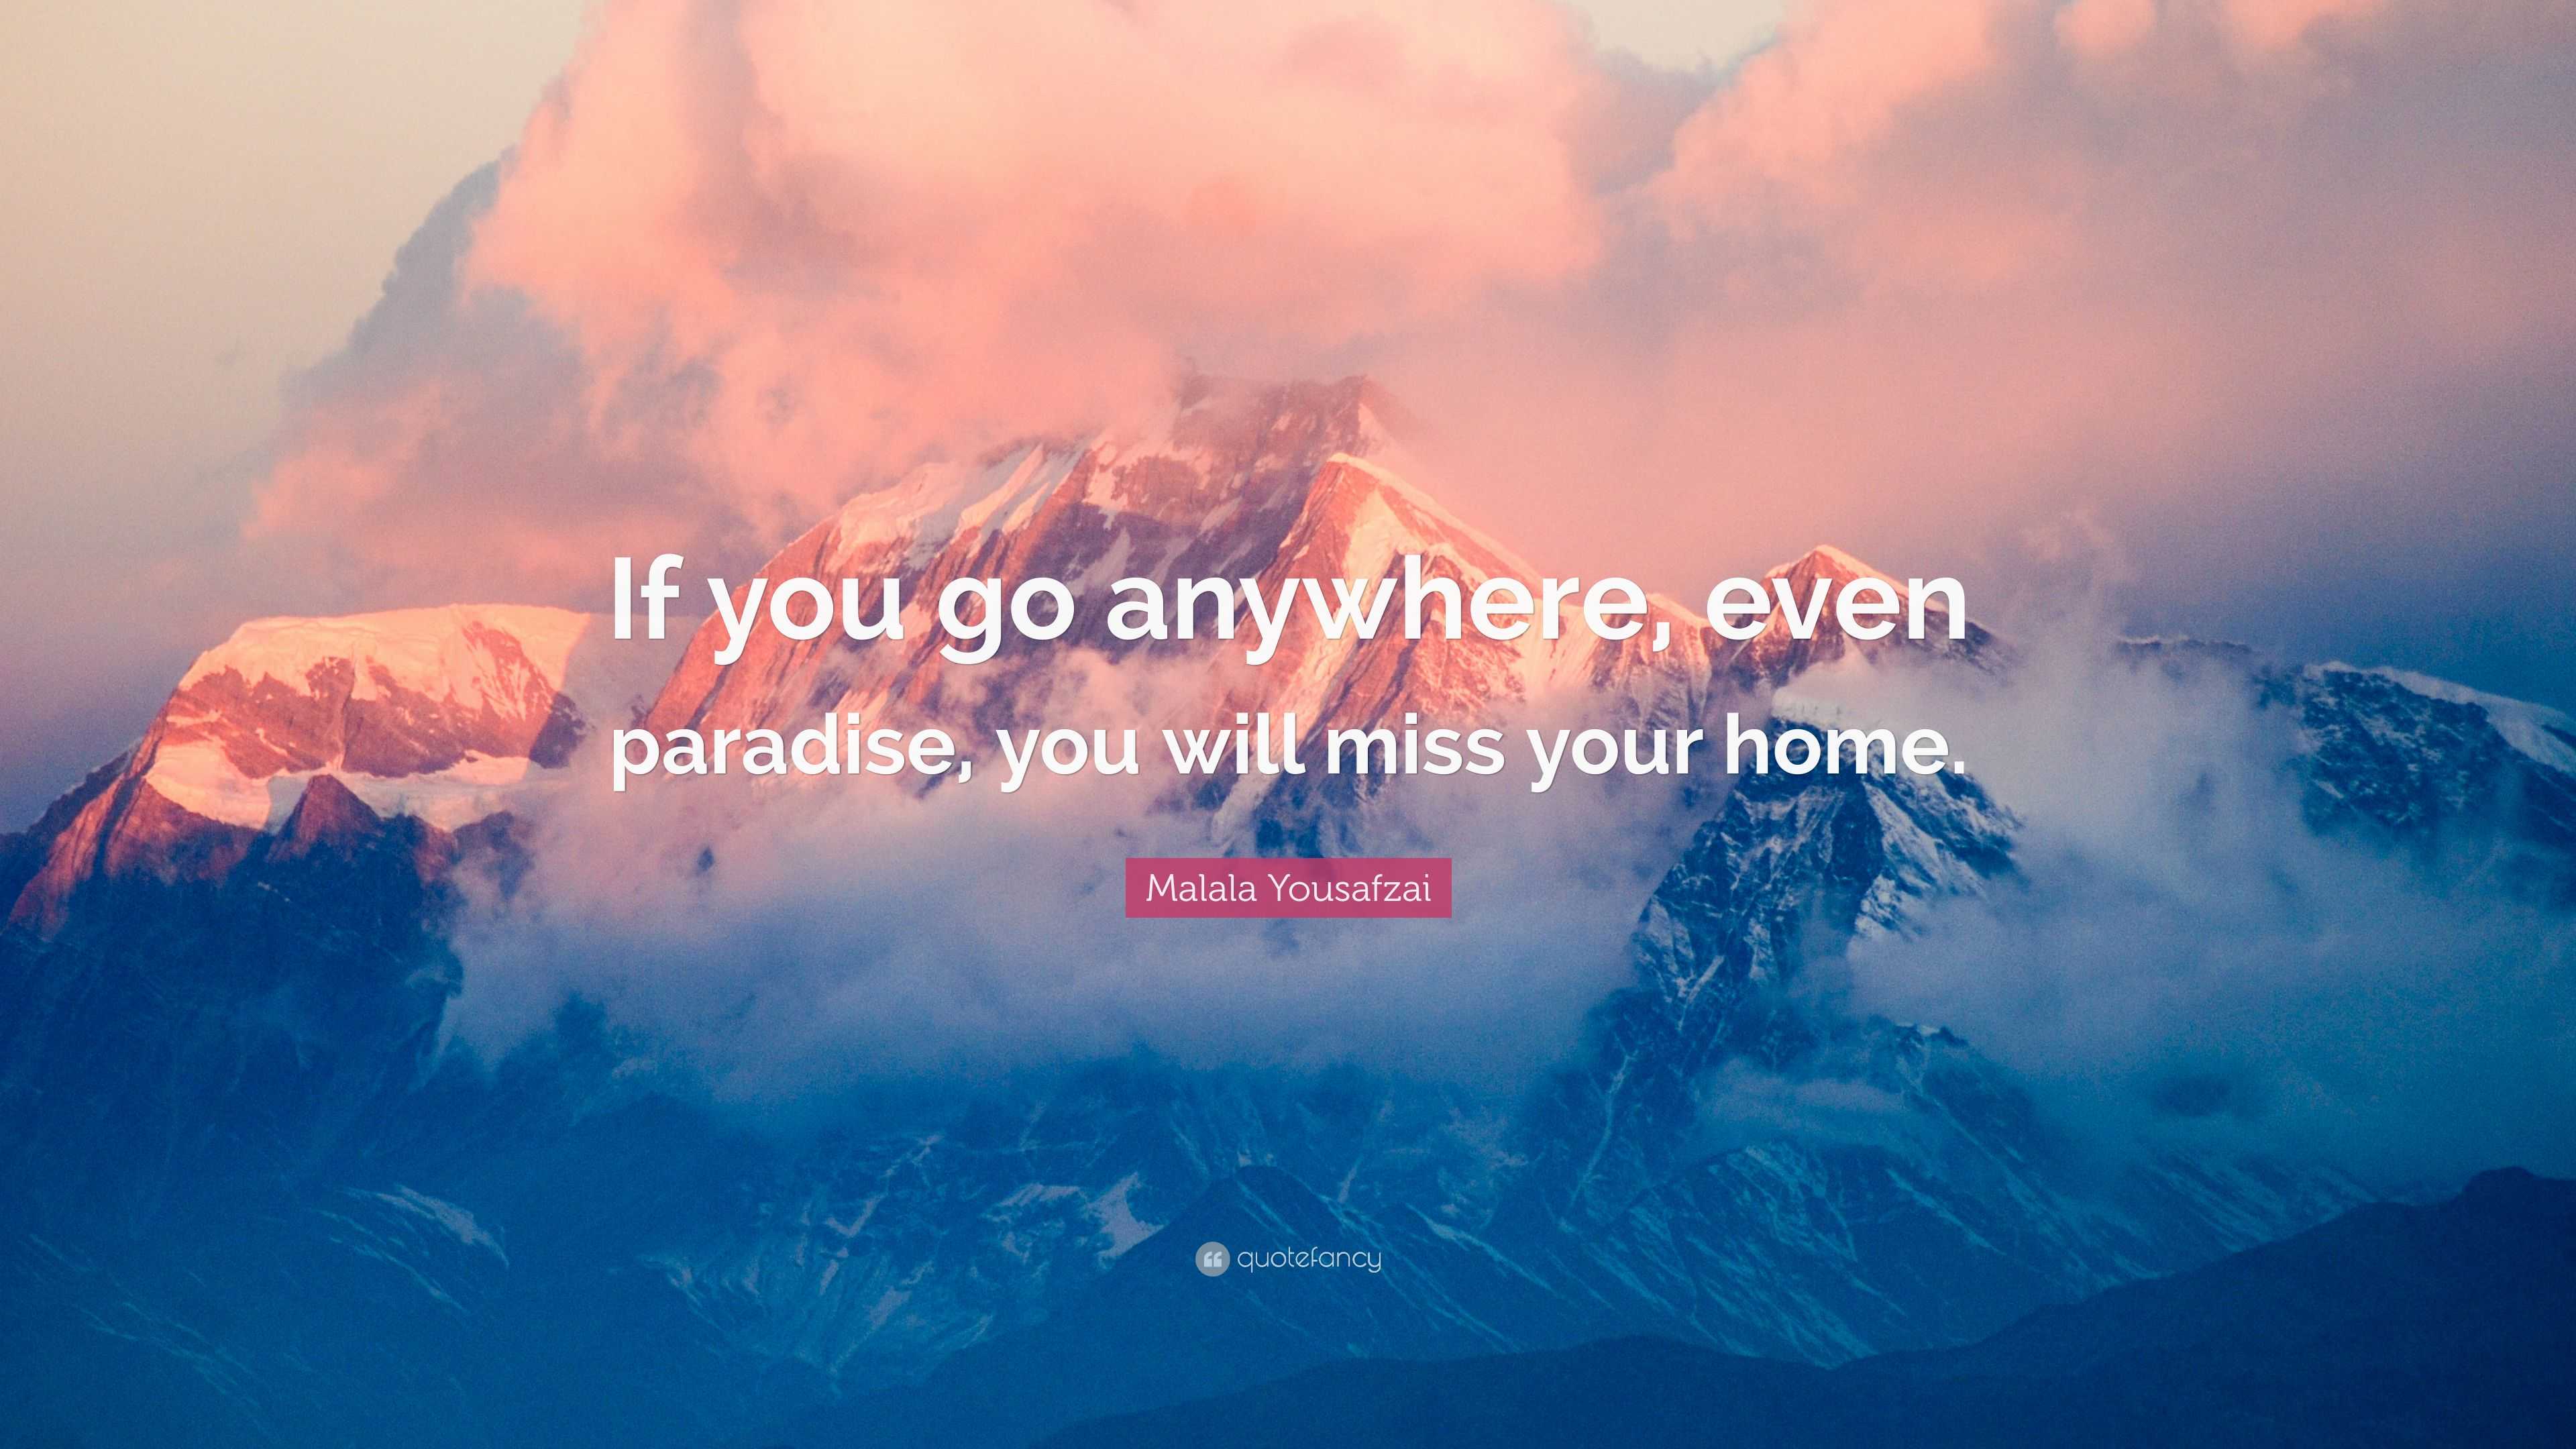 Malala Yousafzai Quote: “If you go anywhere, even paradise, you will ... I Miss Home Quotes